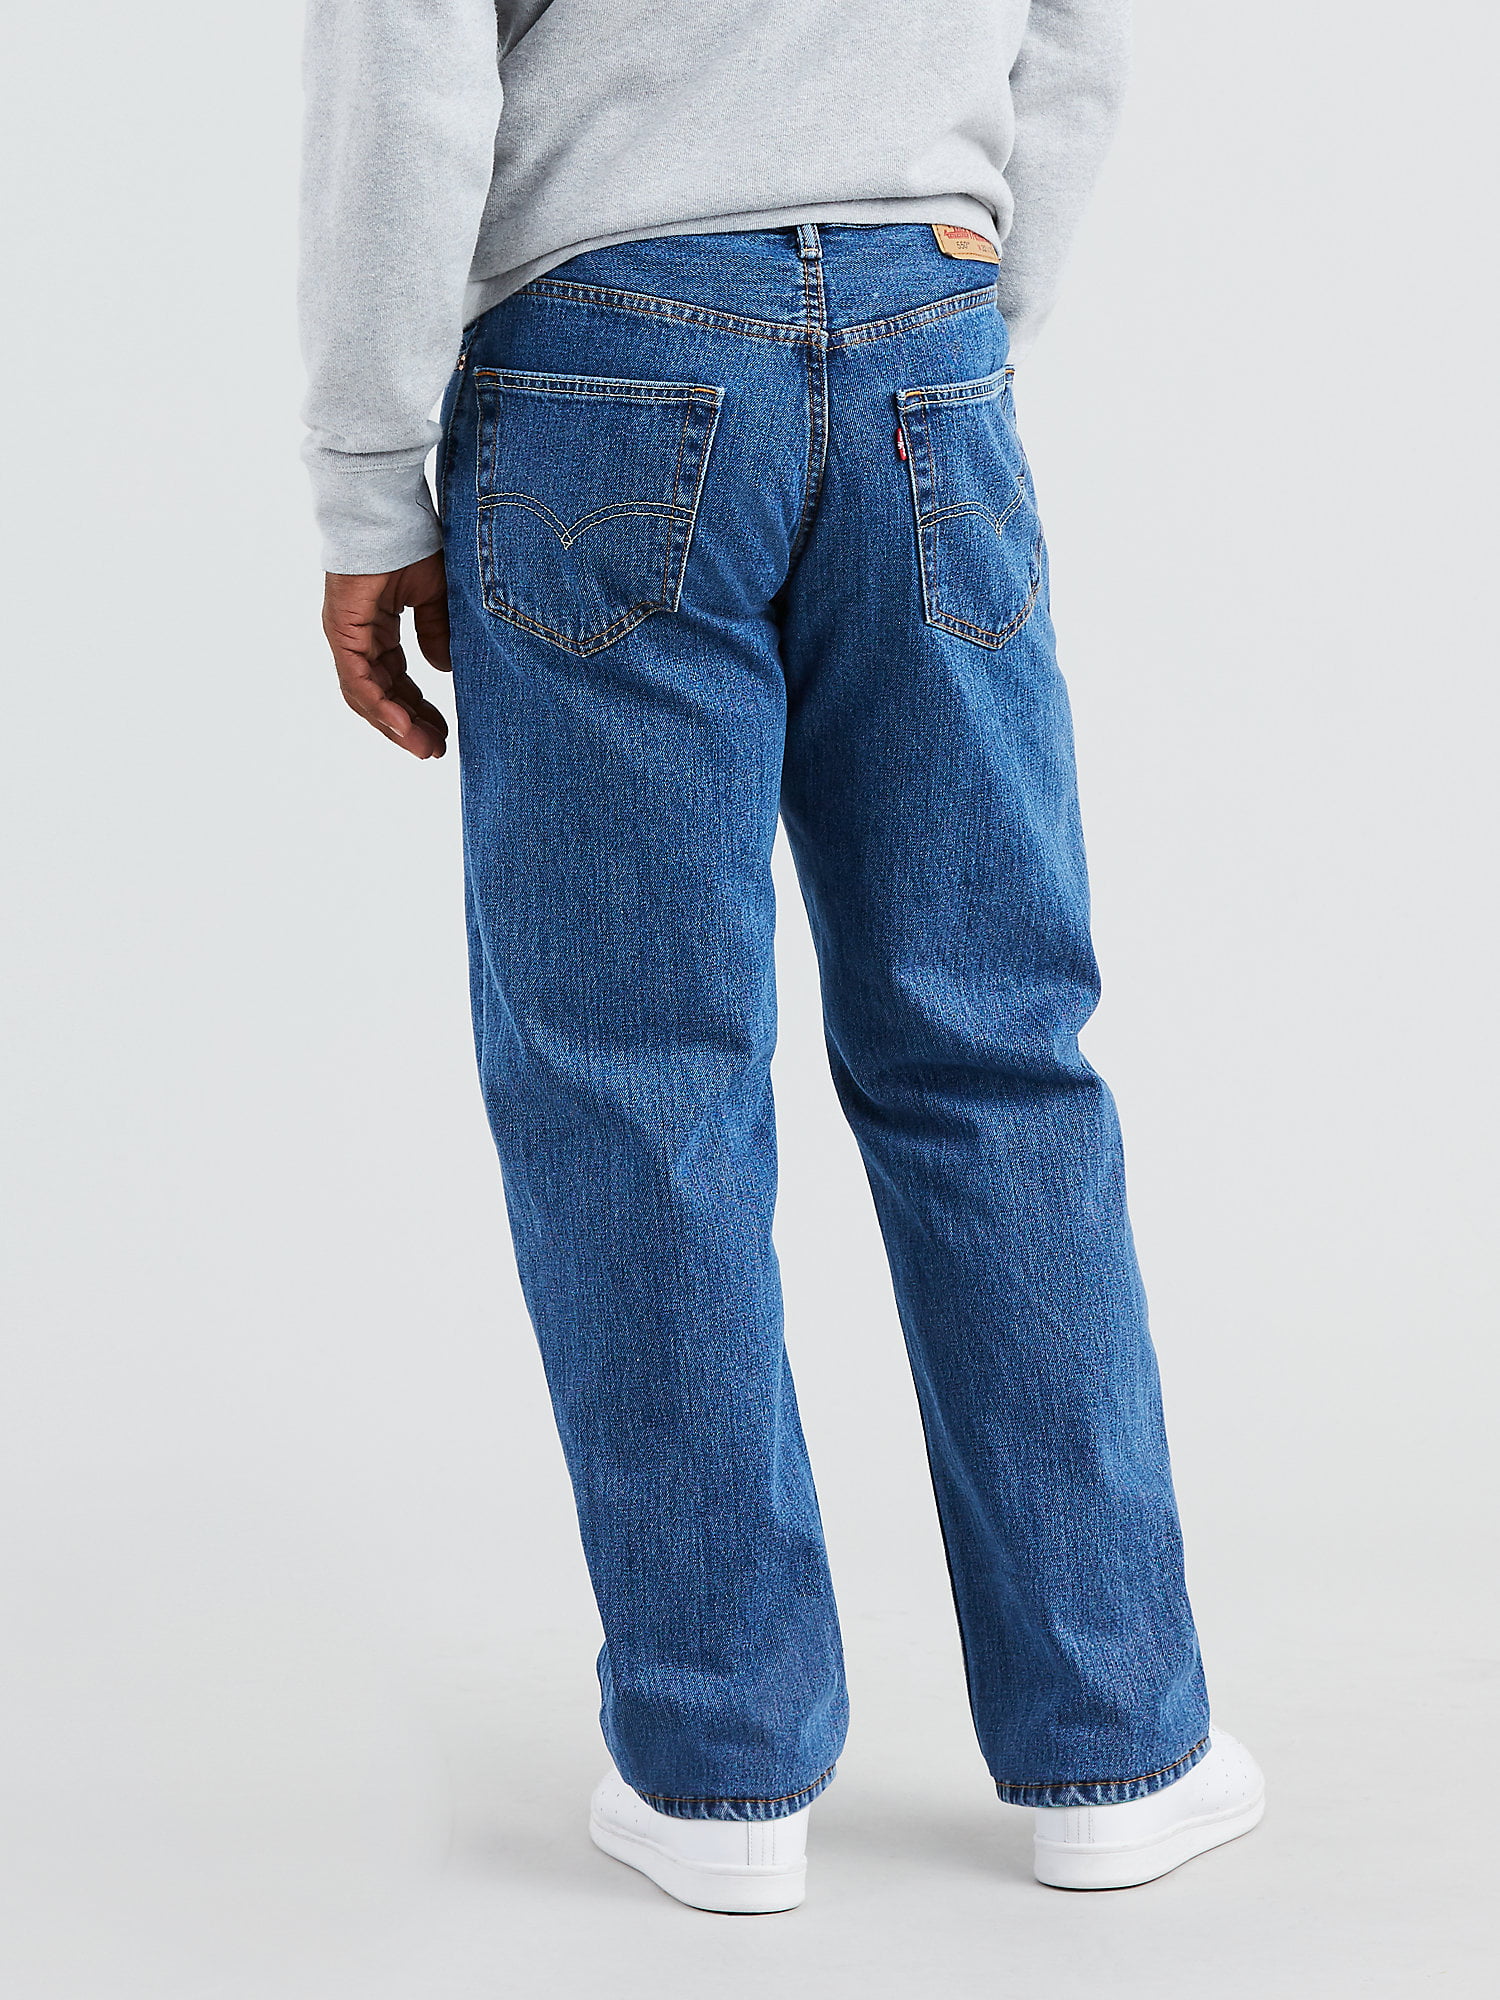 Levi's 550 Men's Relaxed Fit Jeans 